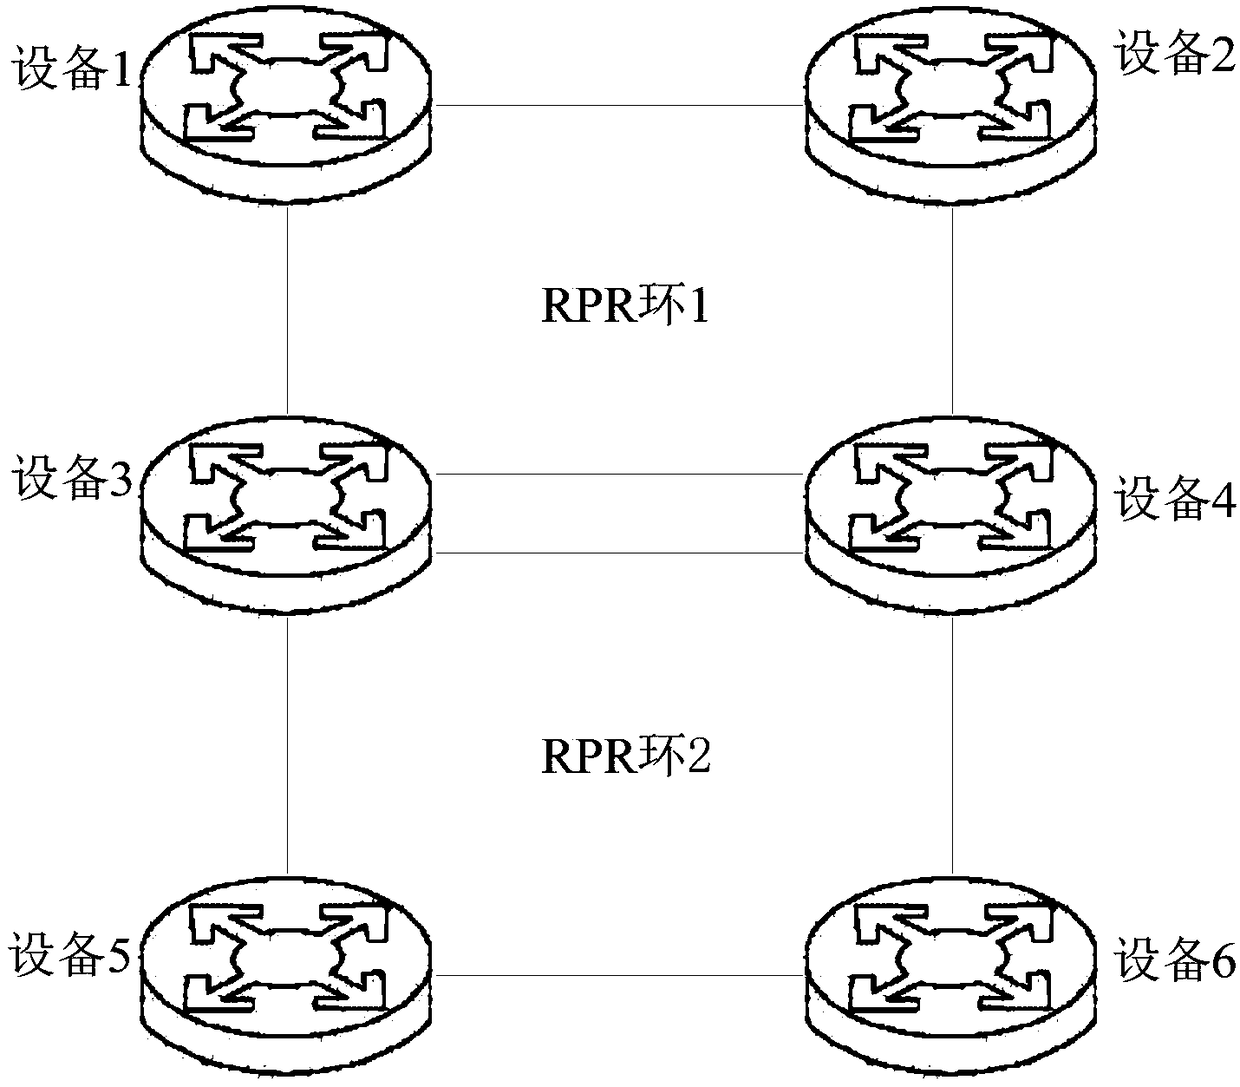 A method and apparatus for switching state of RPR intersecting ring logic interface